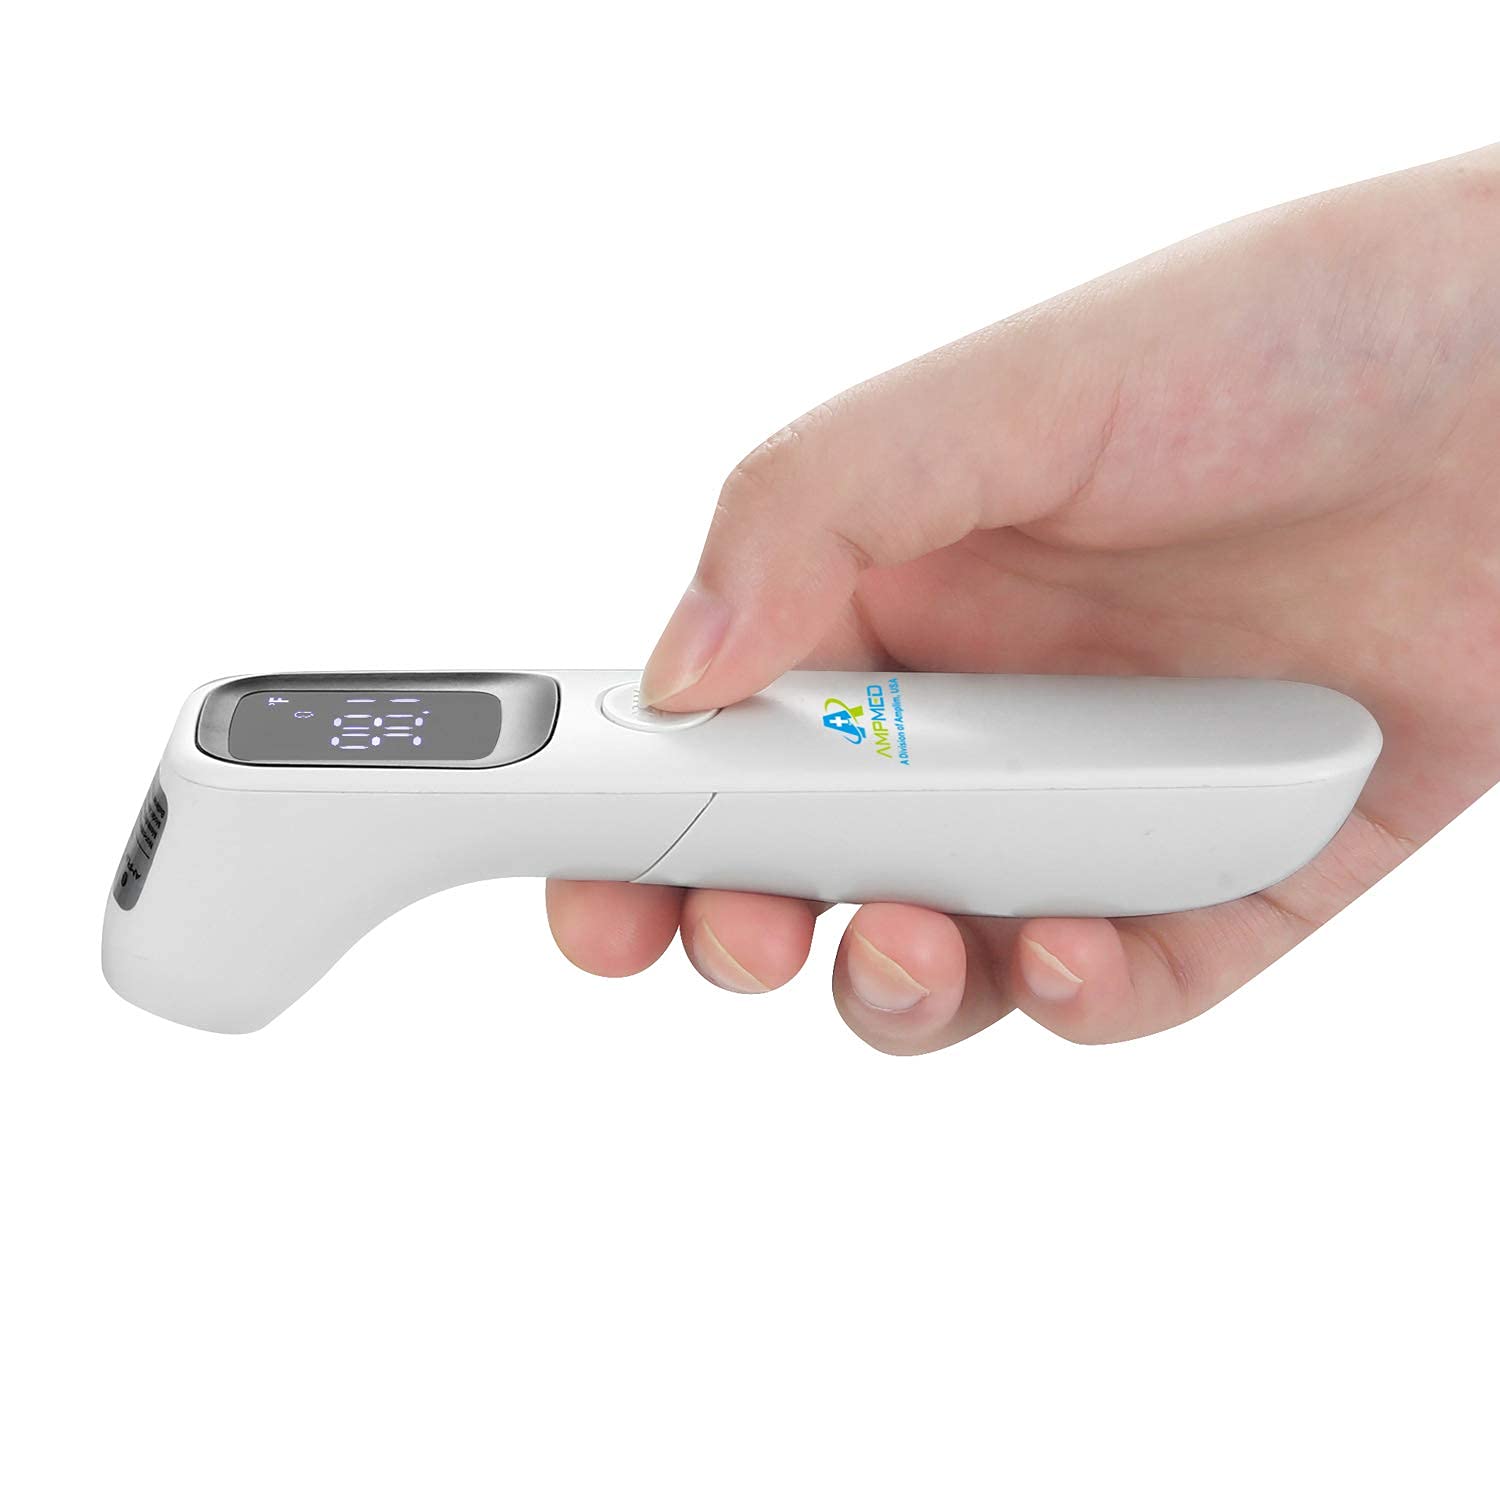 3-Pack Bundle - Amplim Non-Contact Infrared Digital Forehead Thermometer for Baby Hospital Medical Grade No Touch